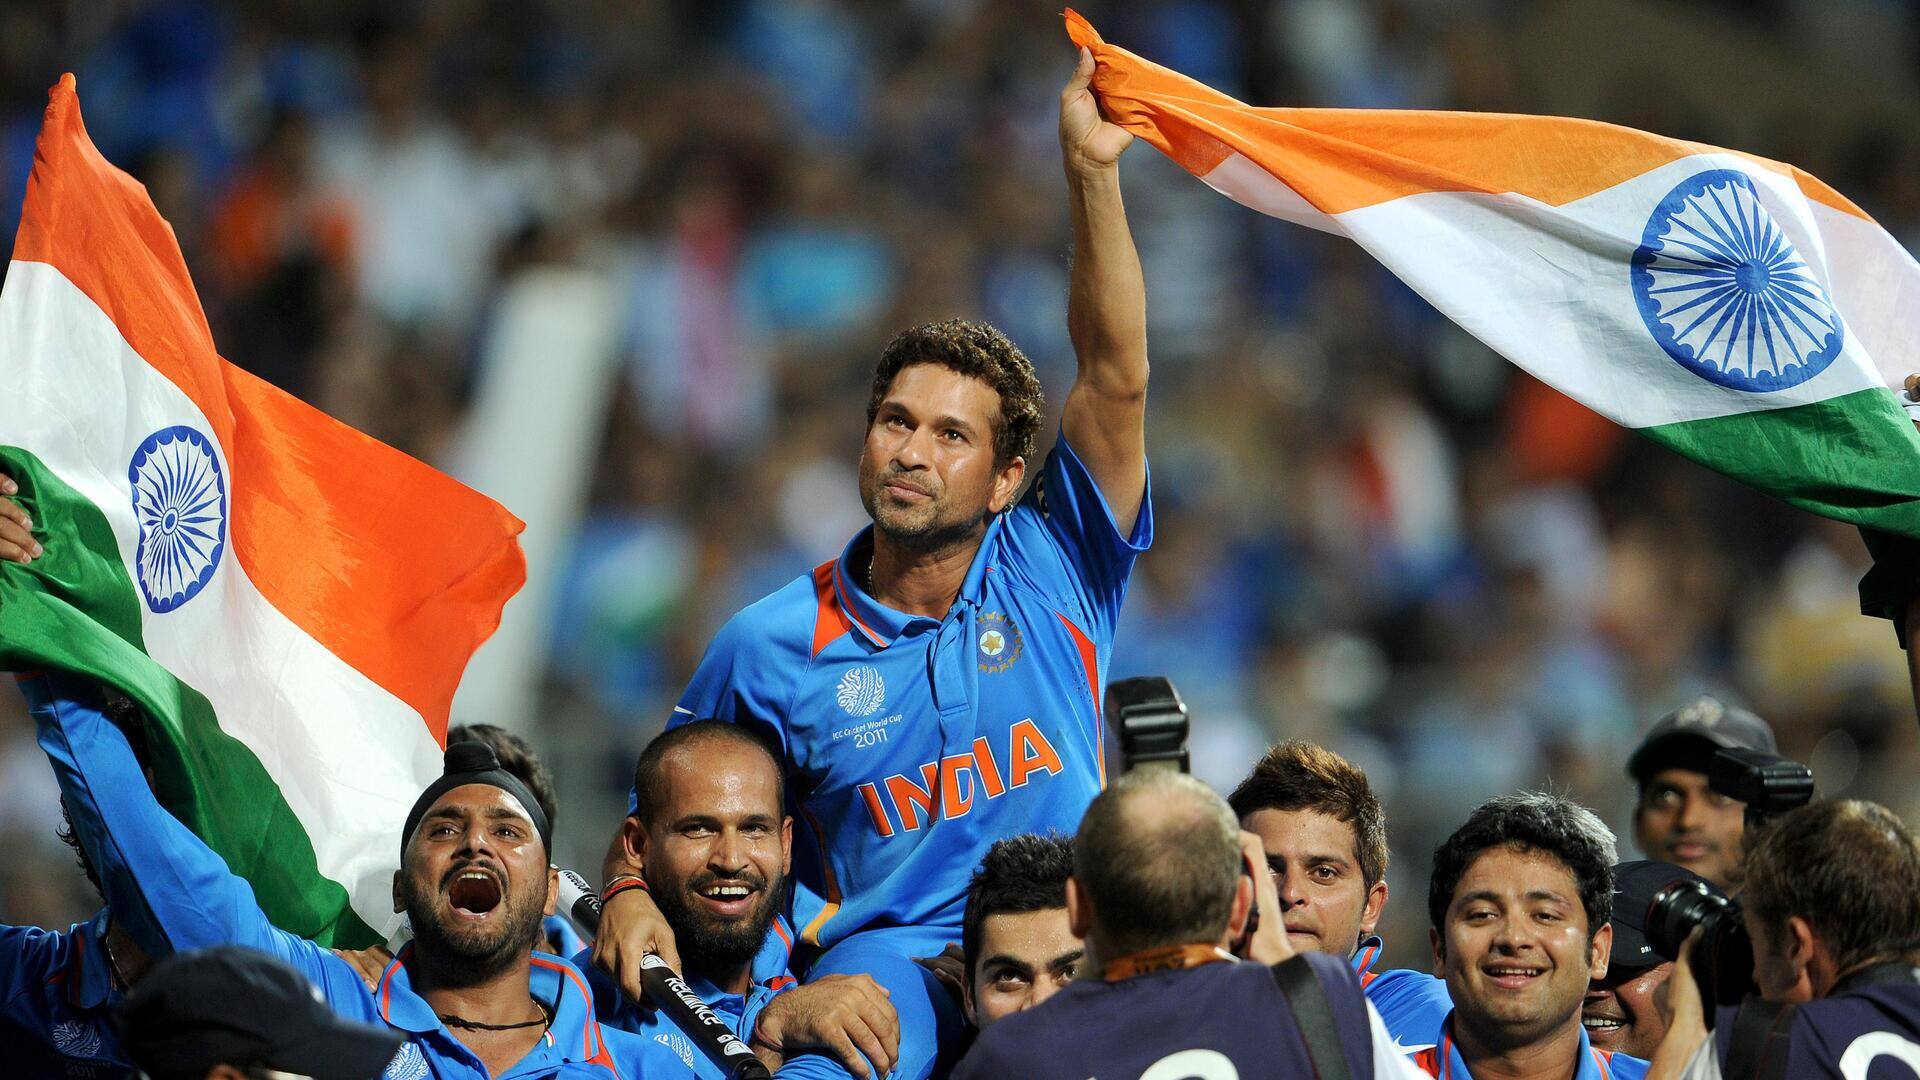 ICC Cricket World Cup: Statistical analysis of India's trophy-winning campaigns